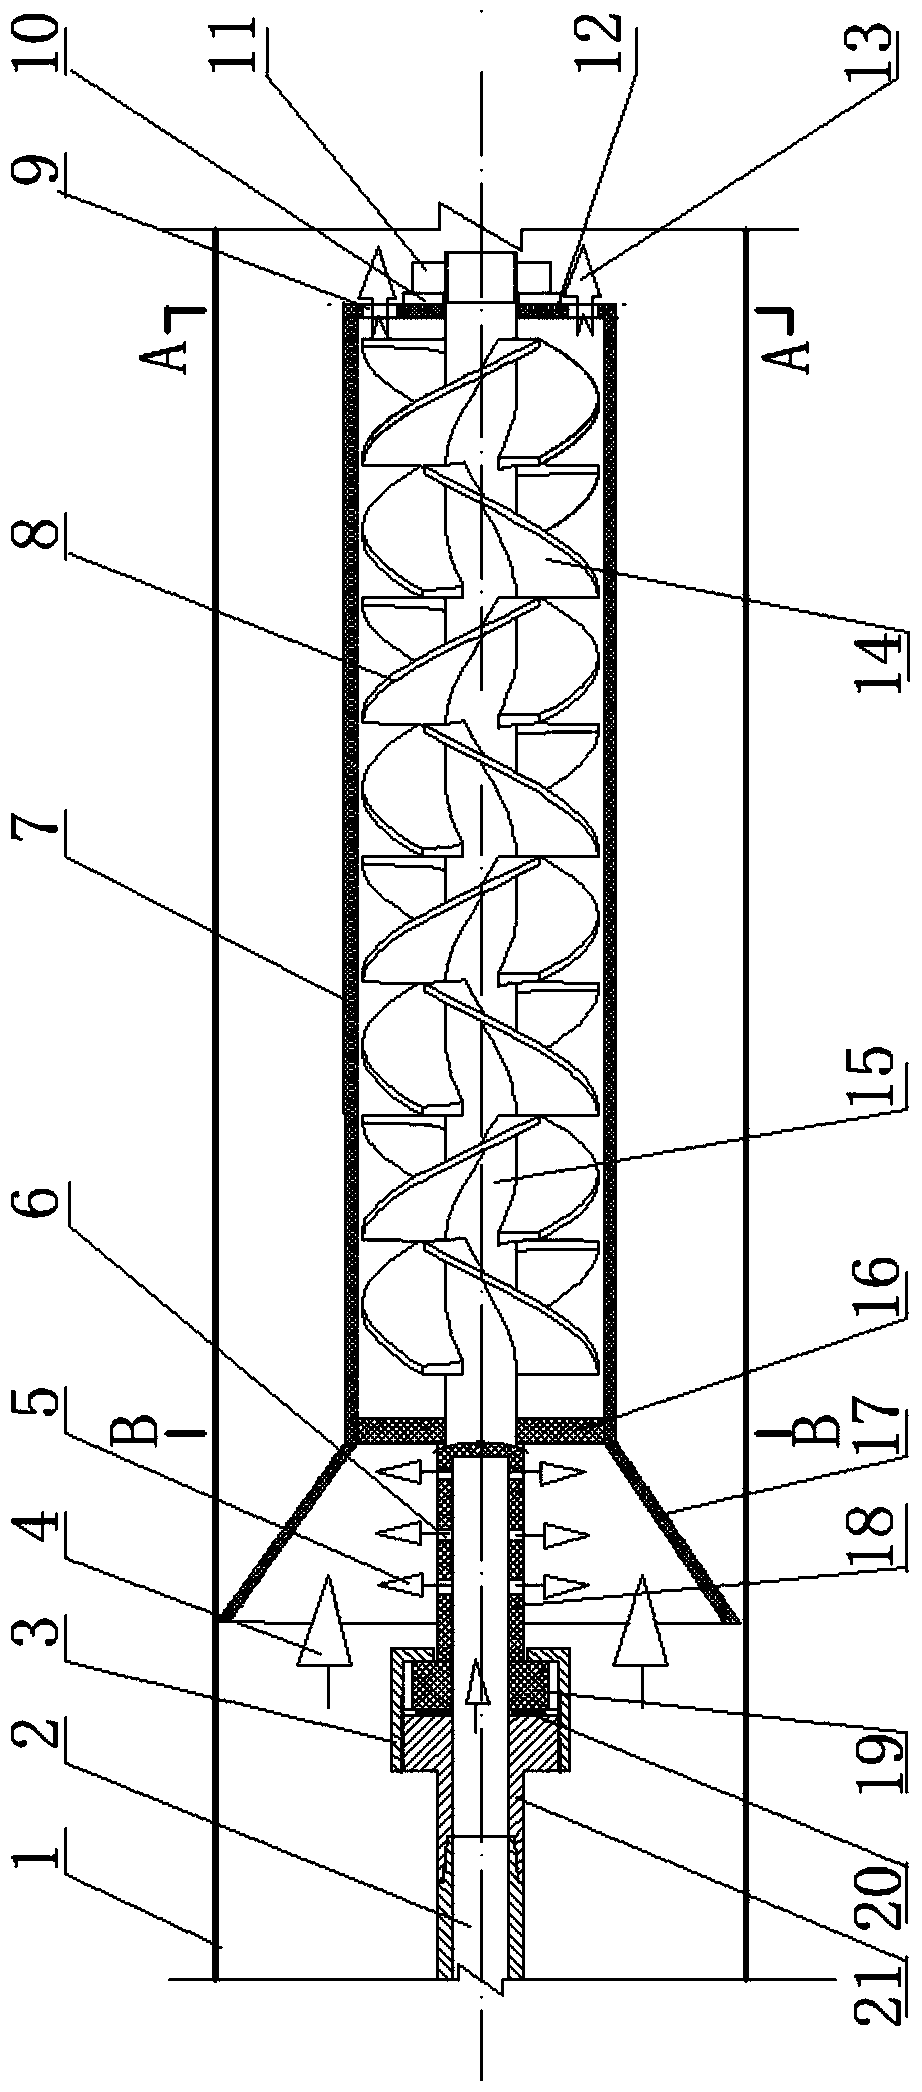 A grout mixing device in ground grouting borehole and its application method